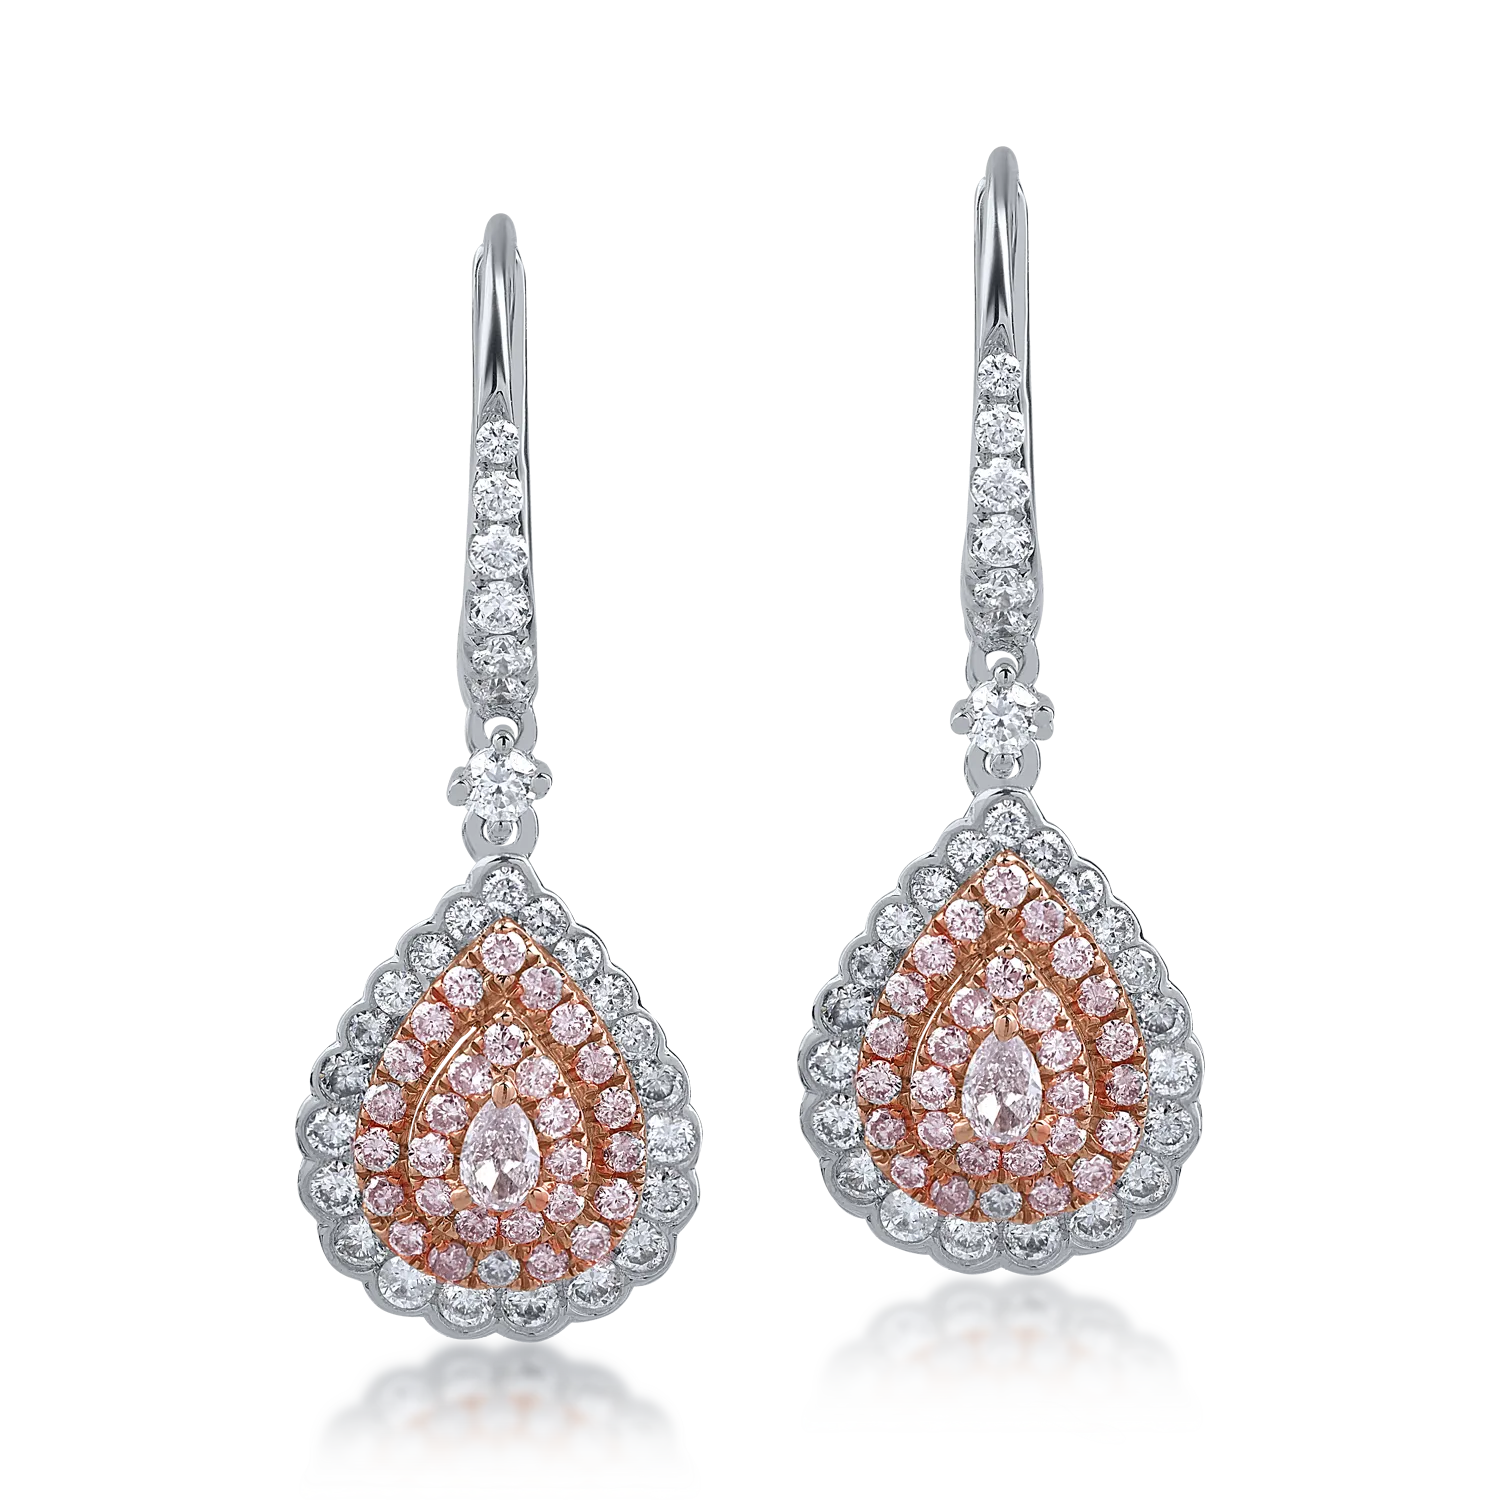 White-rose gold earrings with 0.74ct clear diamonds and 0.56ct rose diamonds